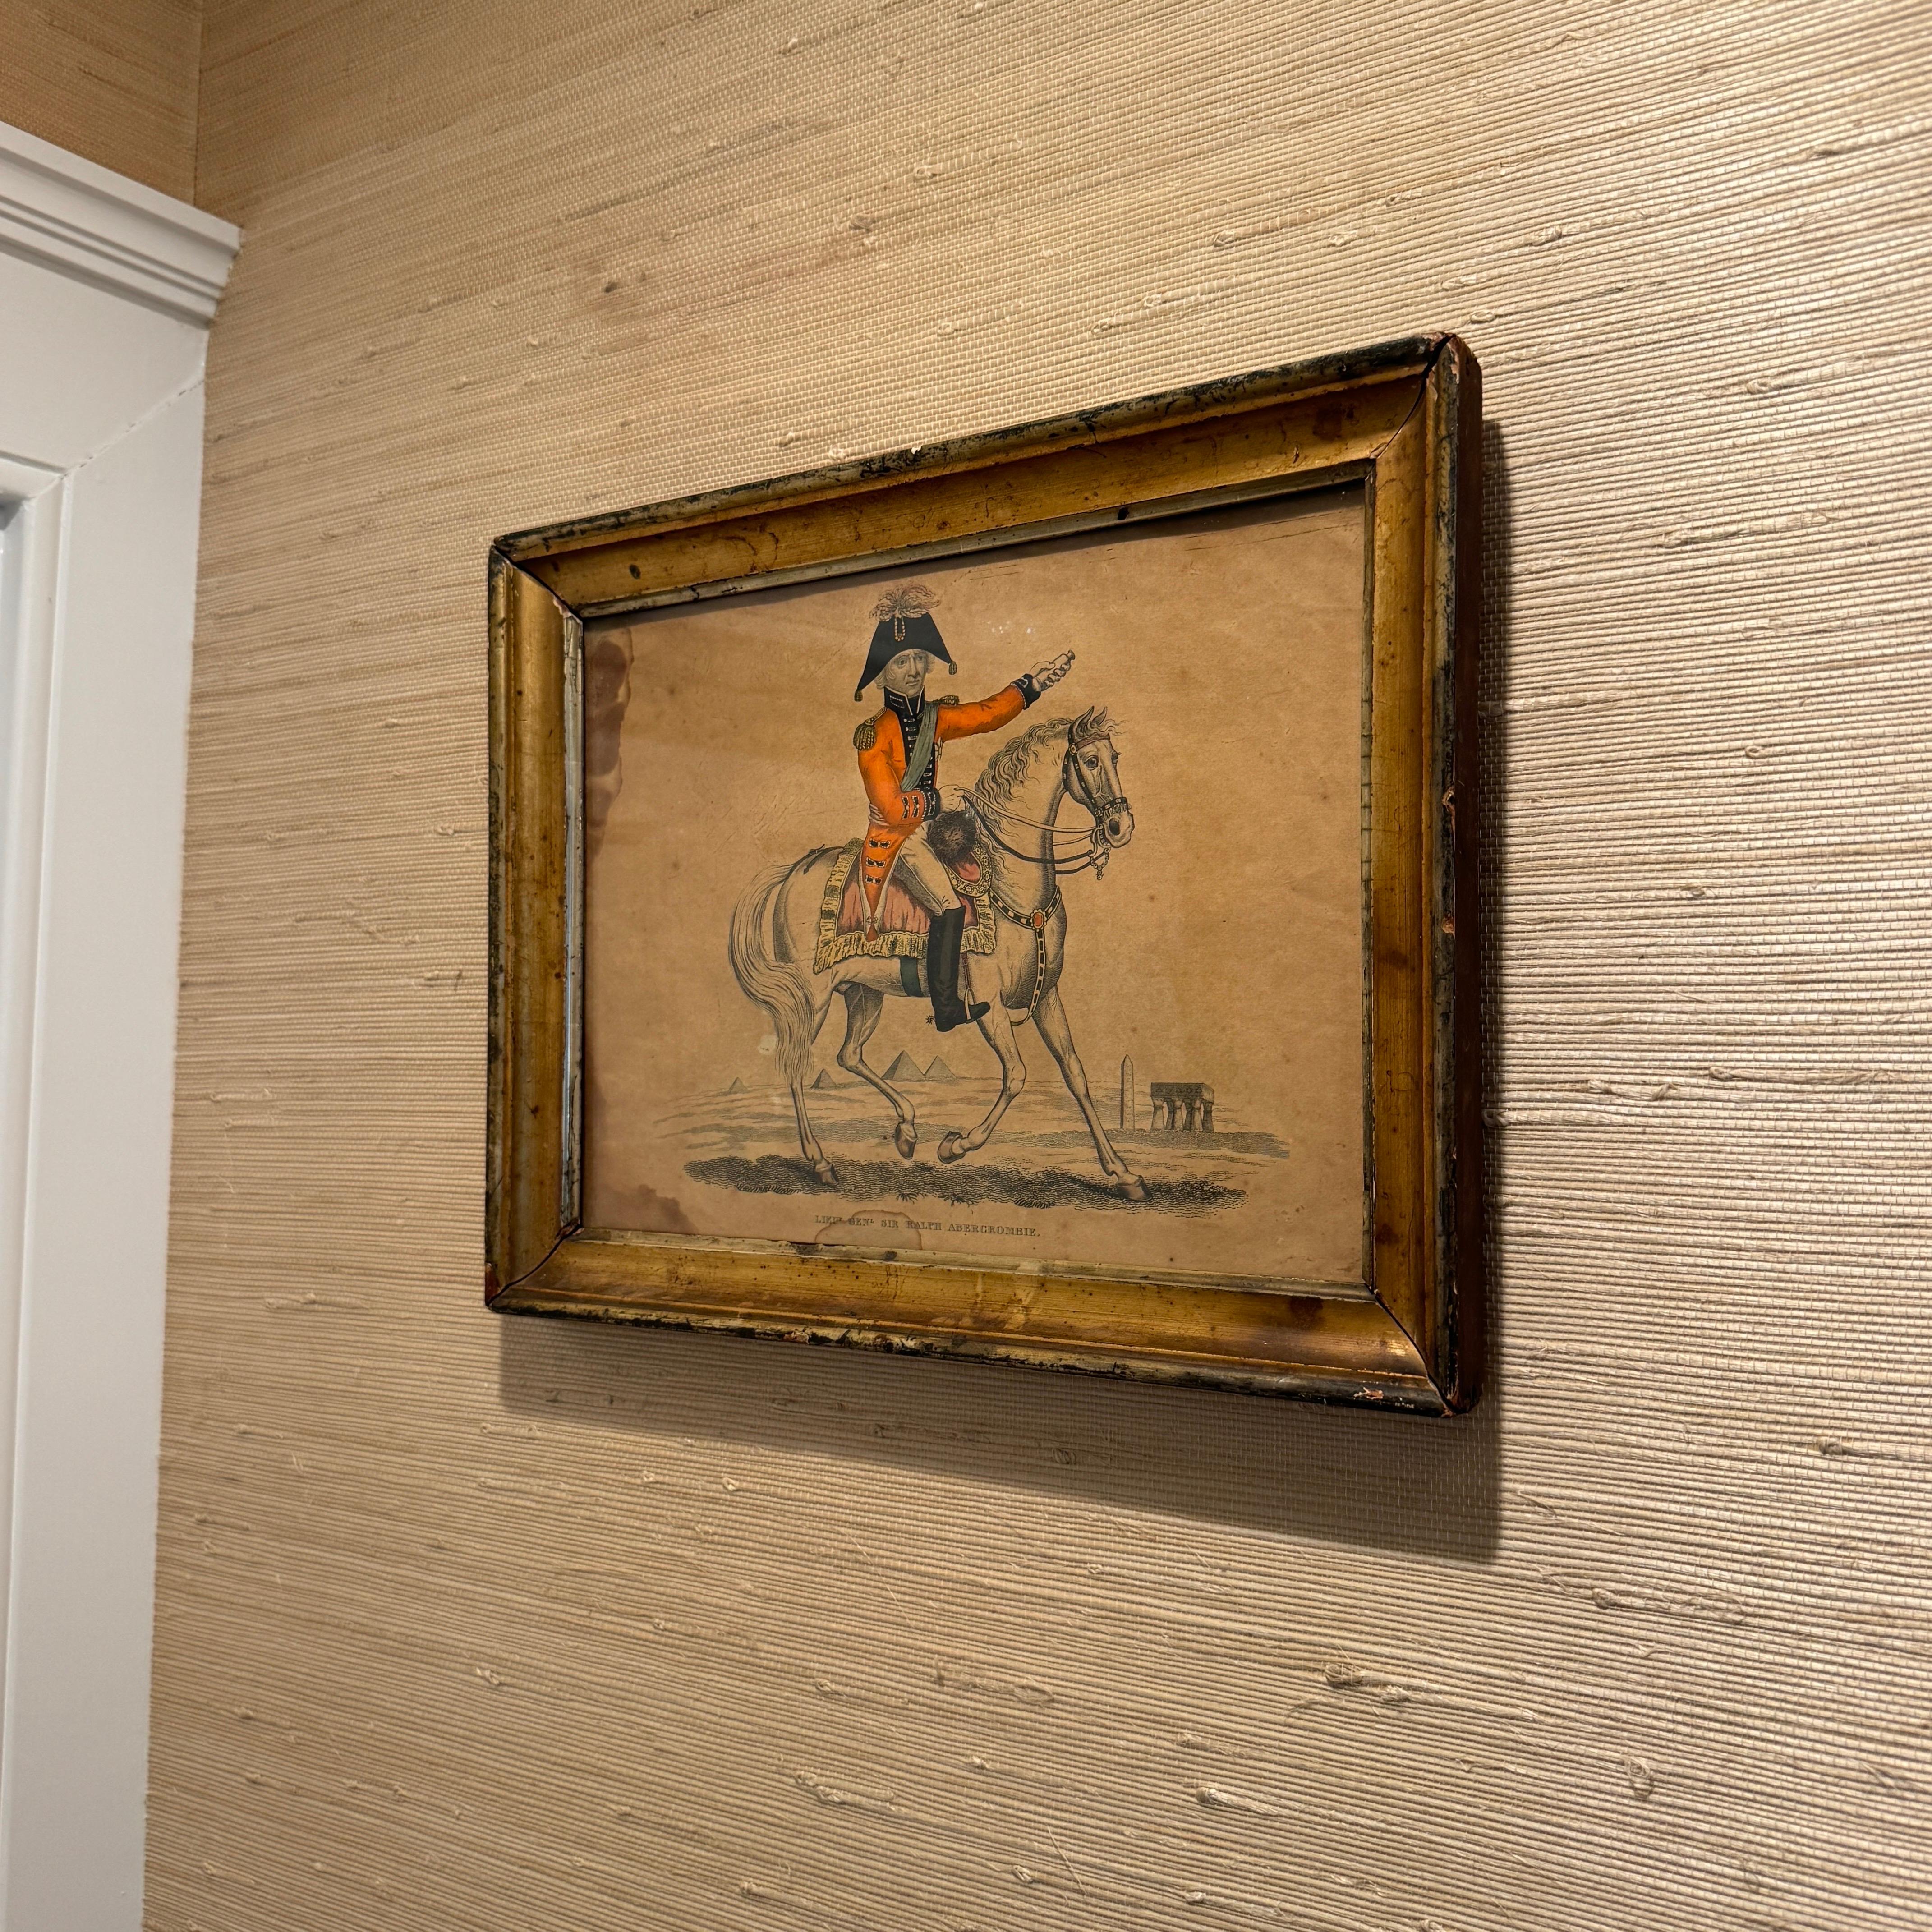 Gouache colorprint in guiltwood pictureframe with antique glass, depicting General Abercrombie.